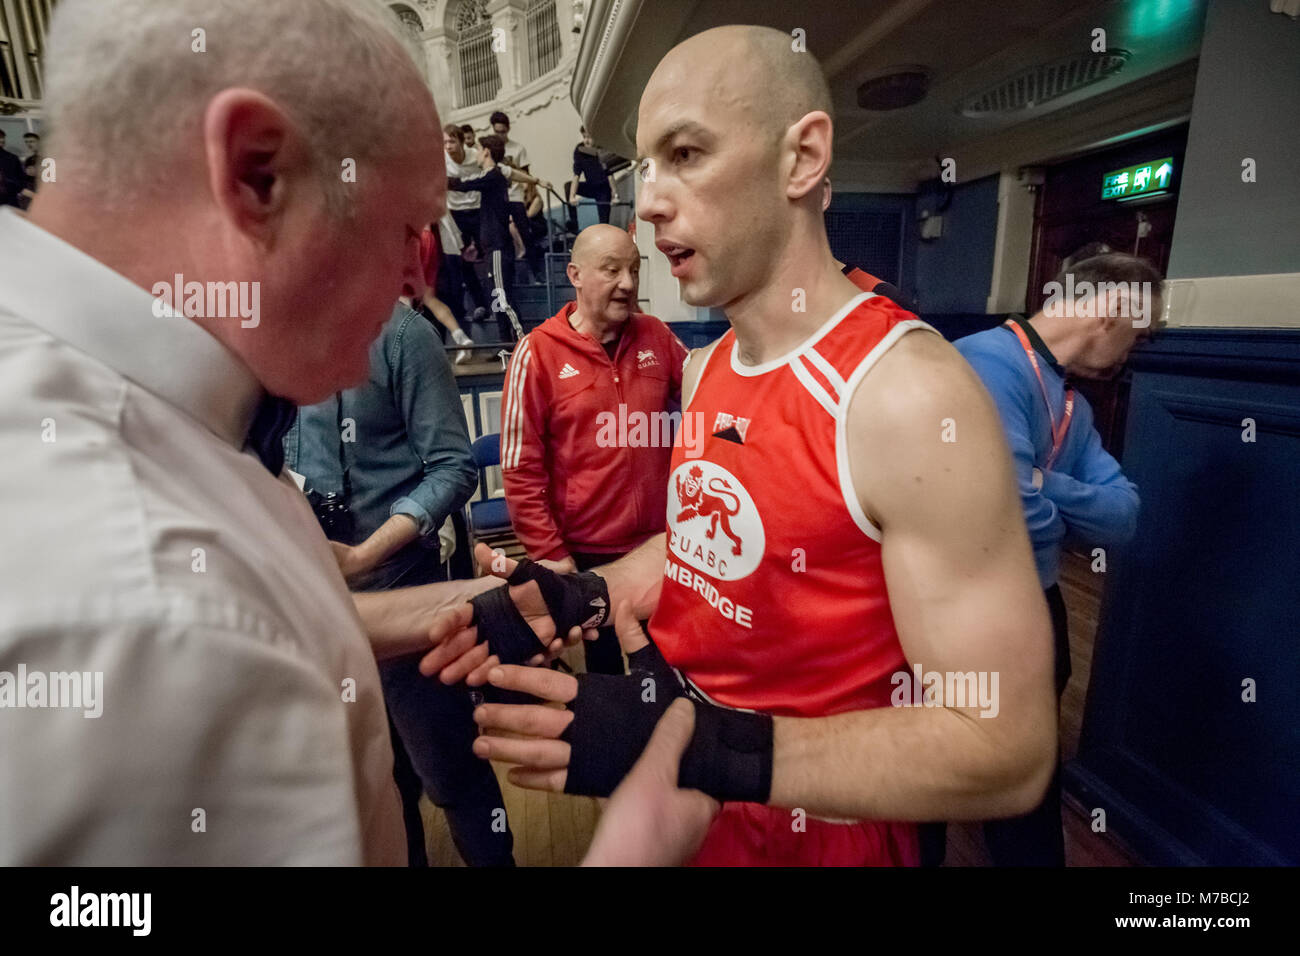 Oxford, UK. 9th March, 2018. Aiden Cope (Red, Cambs) Oxford vs Cambridge. 111th Varsity Boxing Match at Oxford Town Hall. Credit: Guy Corbishley/Alamy Stock Photo - Alamy